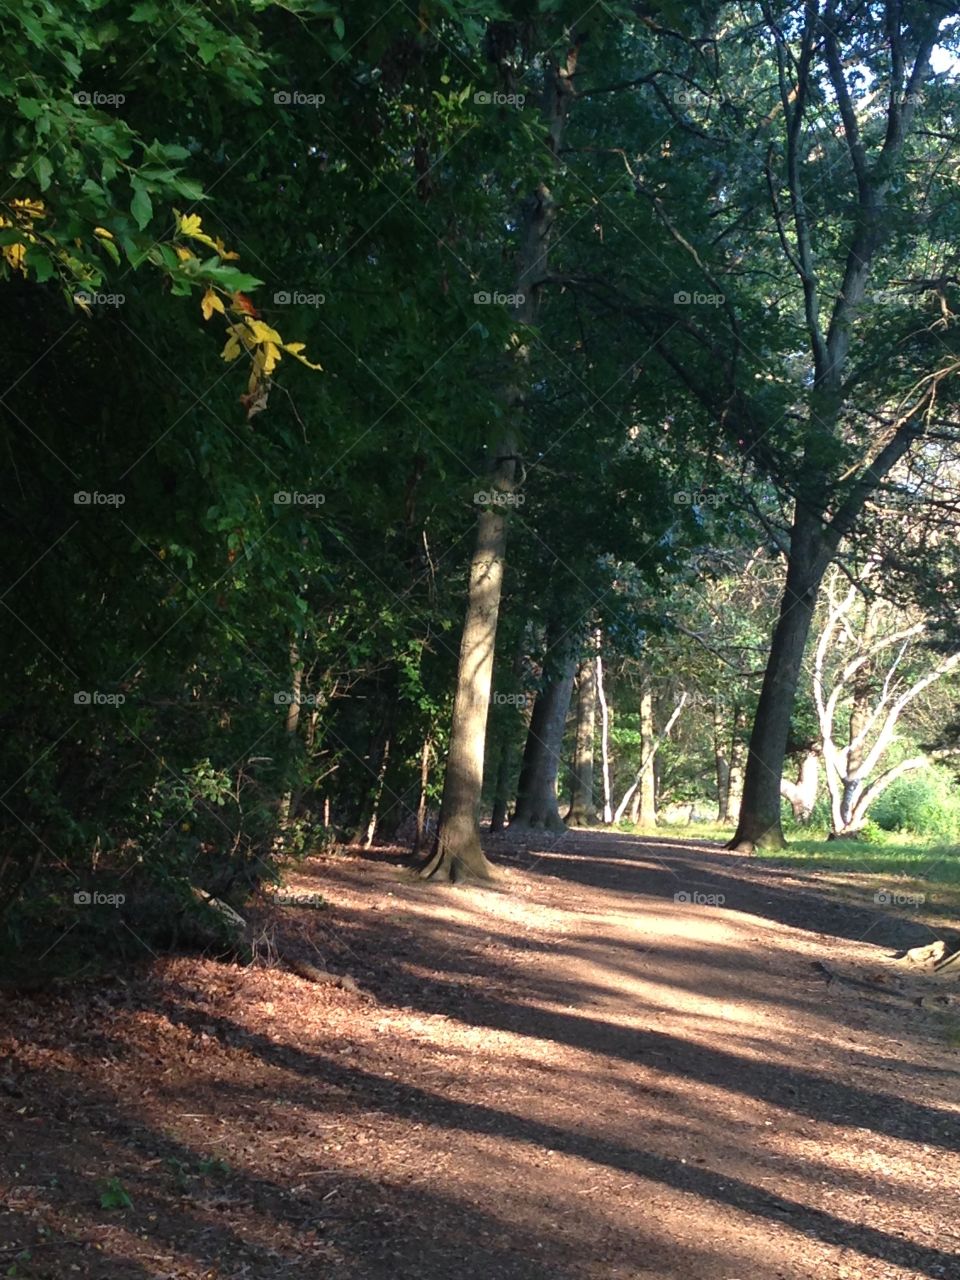 Walking along the path in Norembega Park 